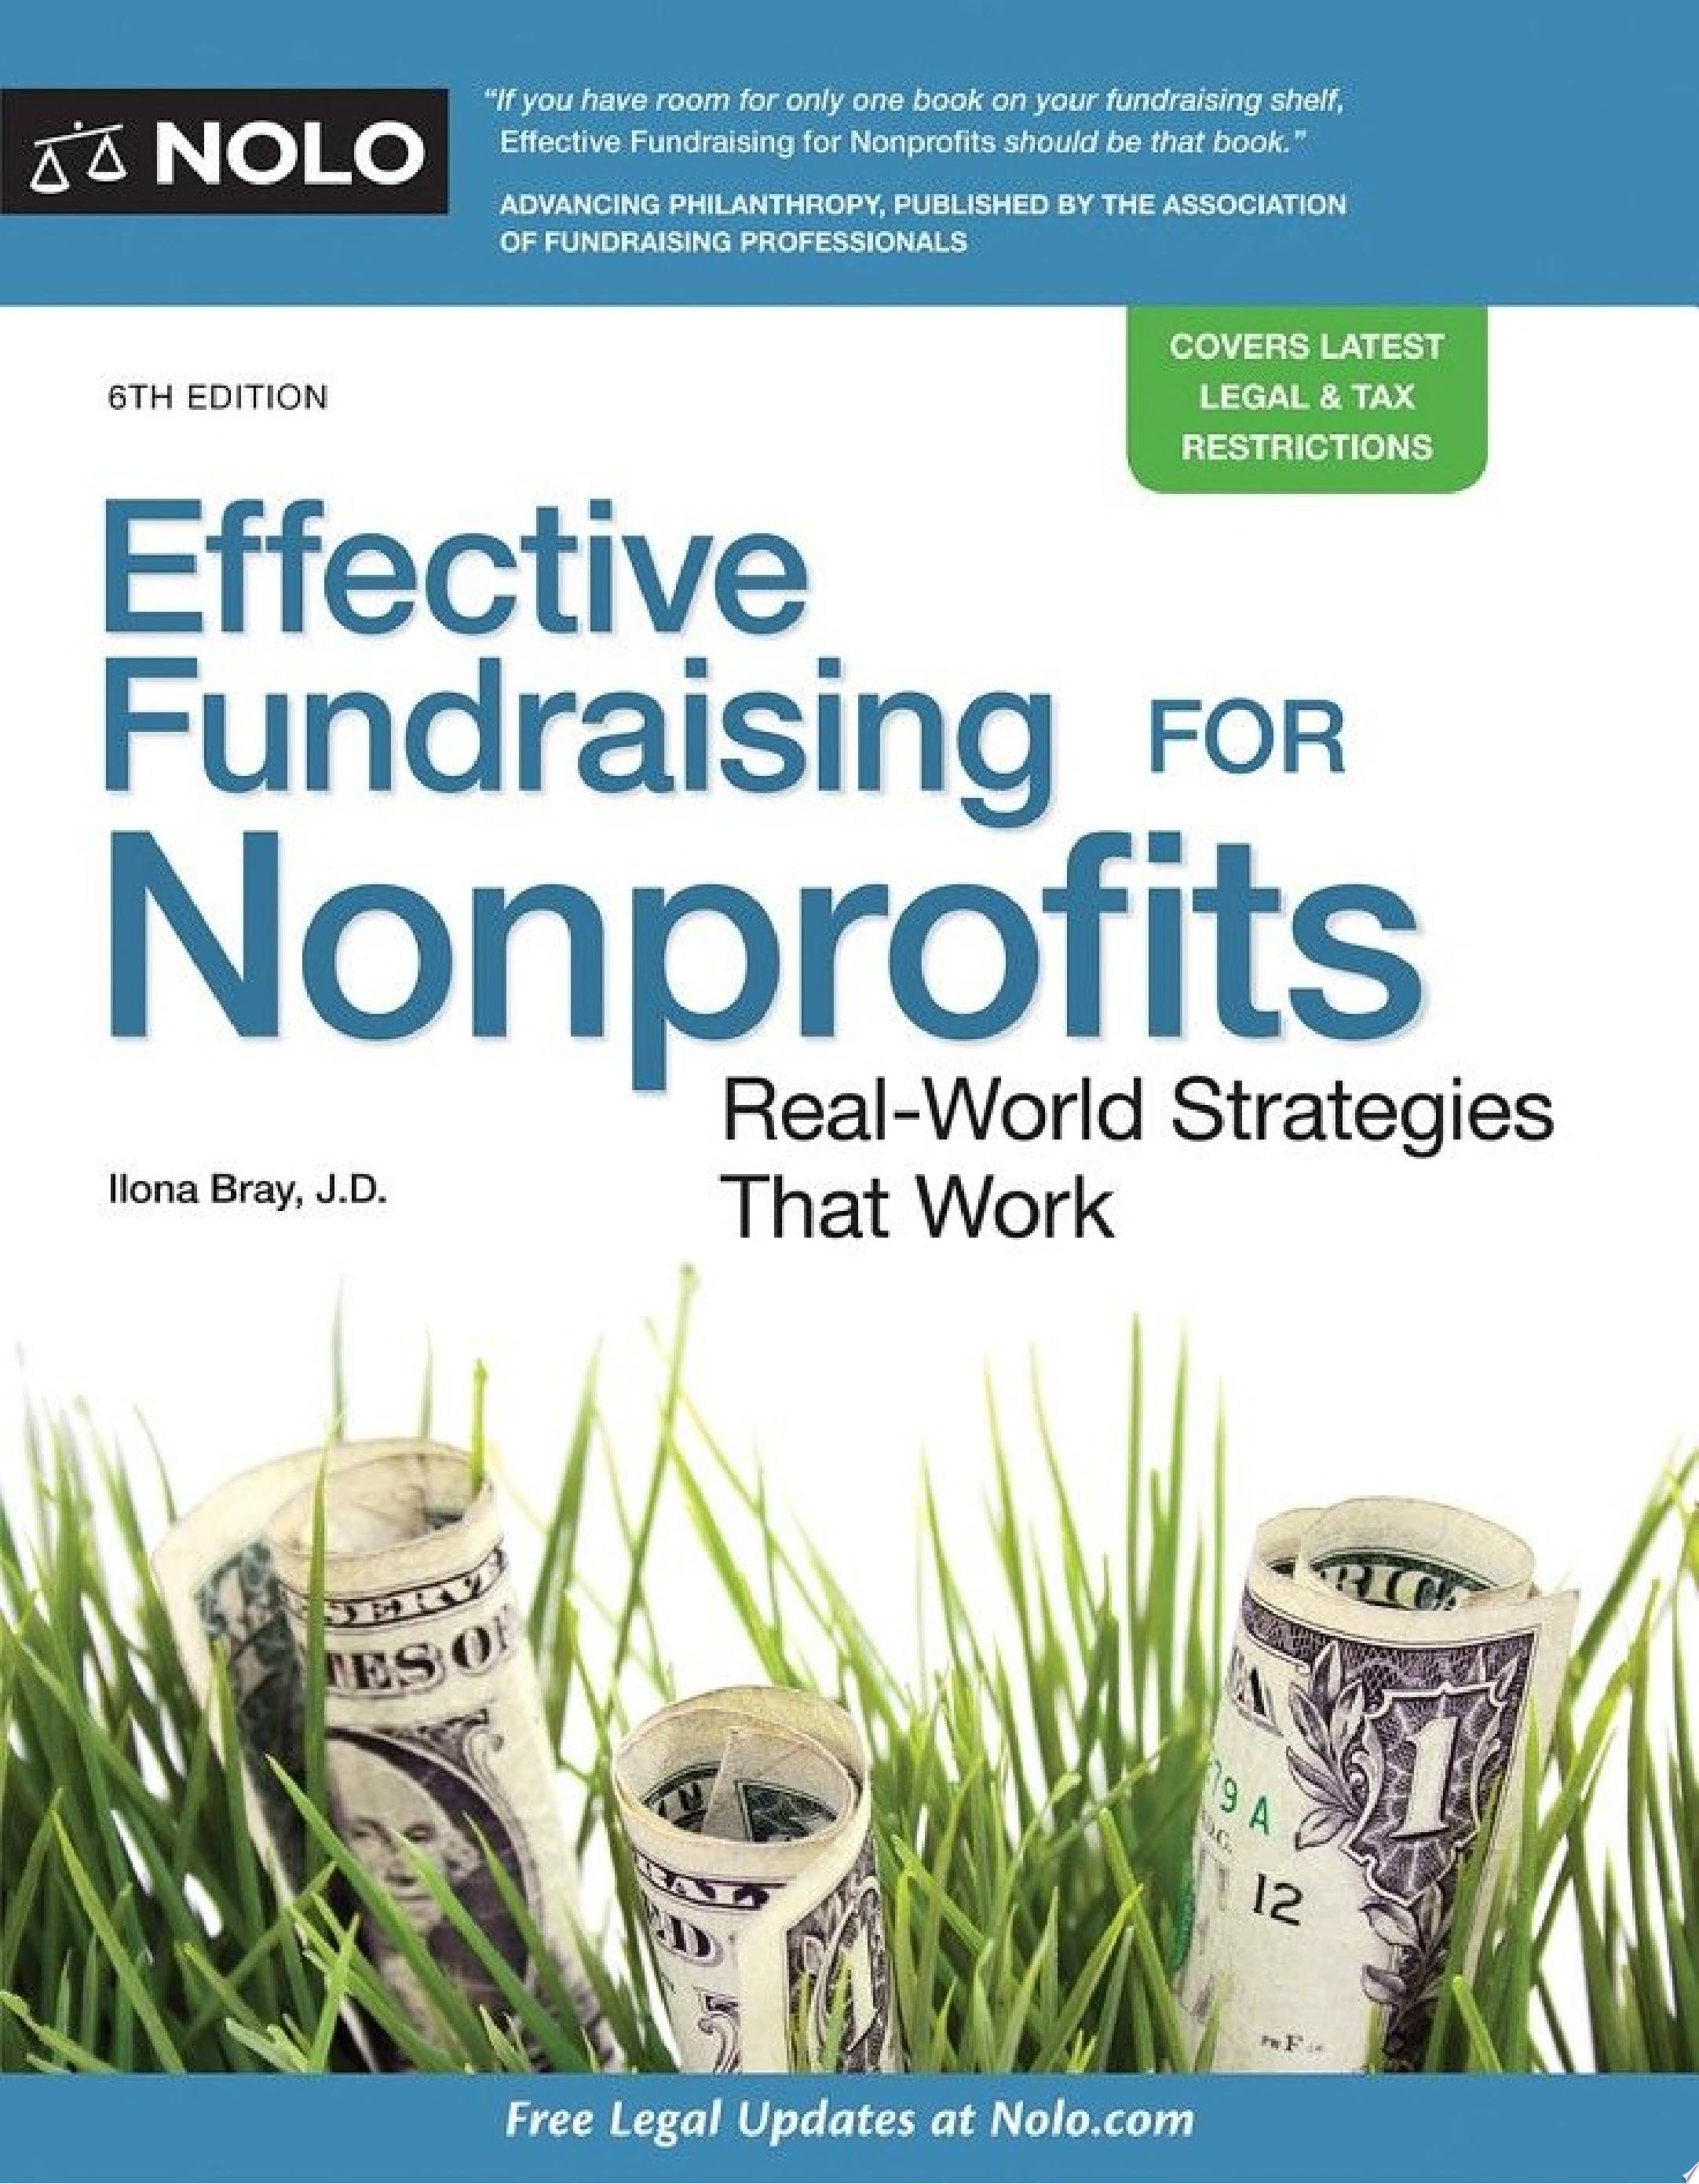 Image for "Effective Fundraising for Nonprofits"